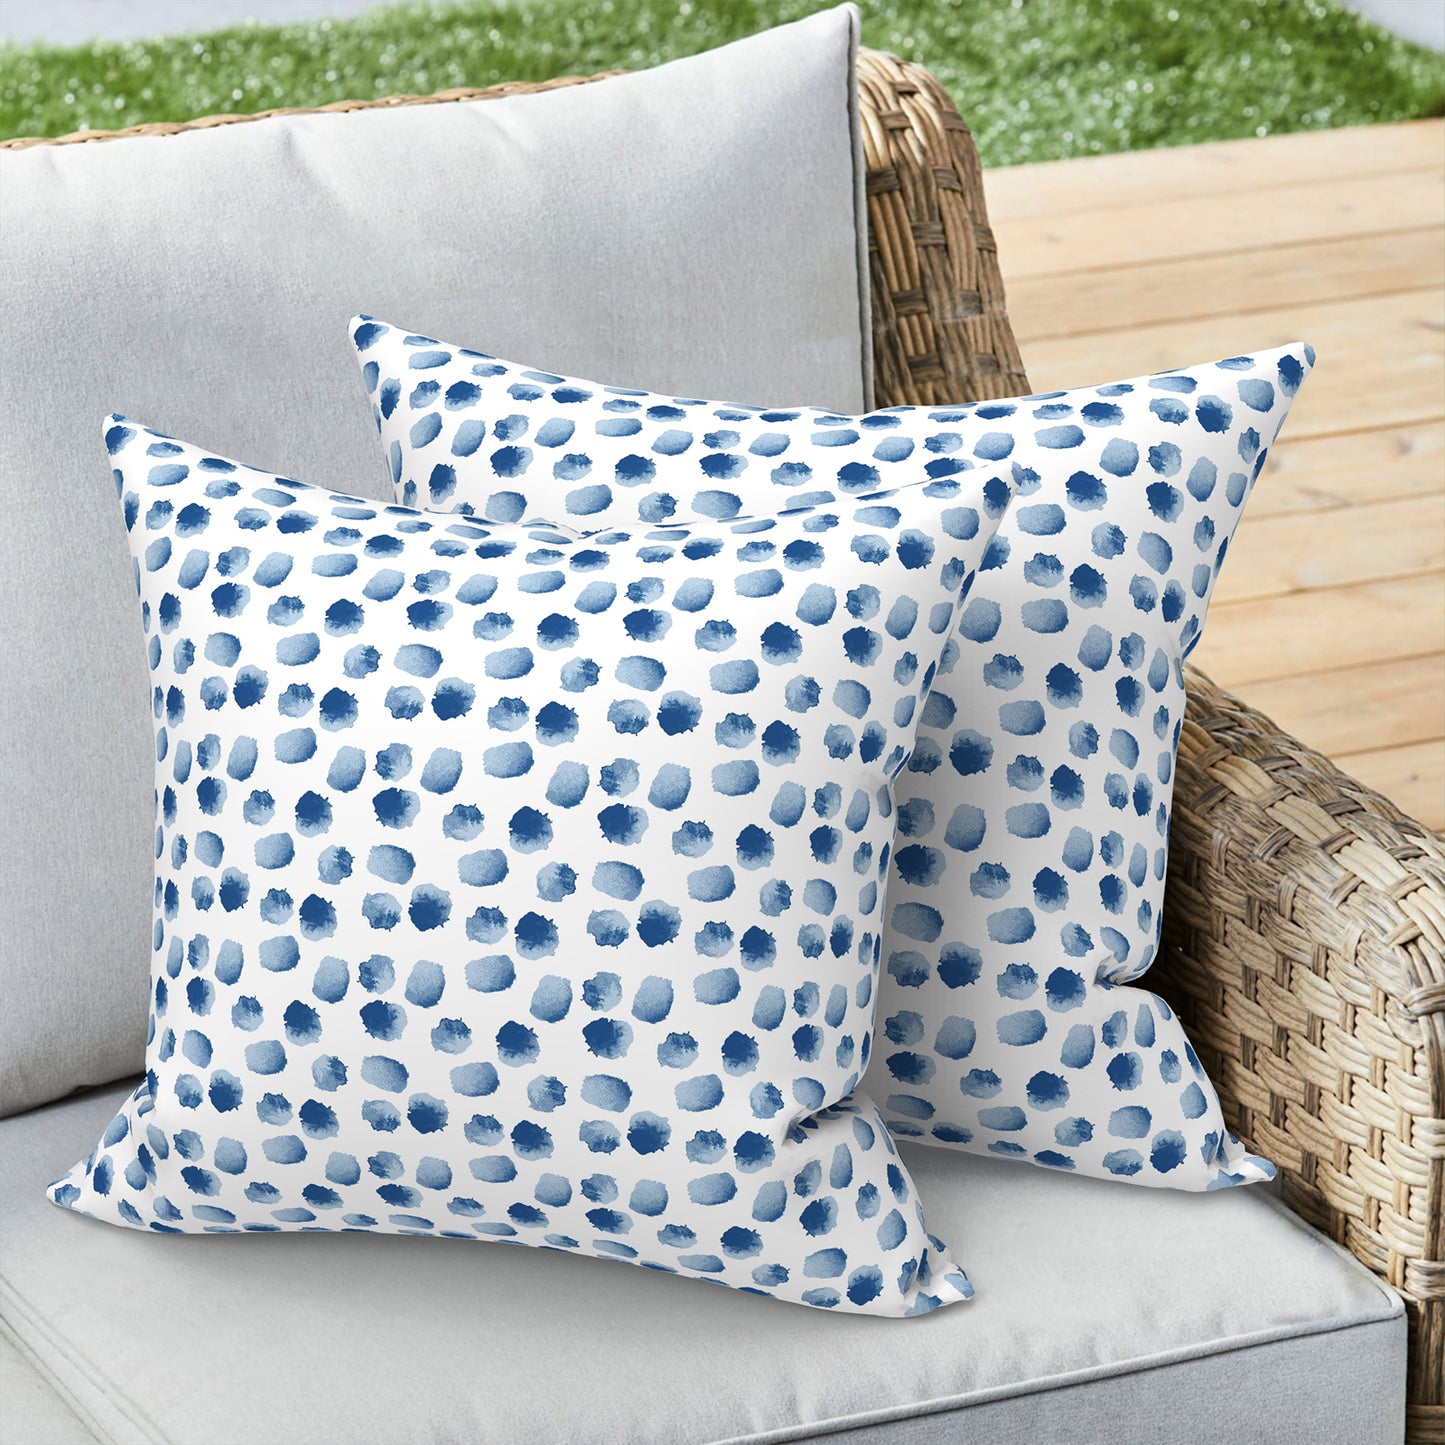 Melody Elephant Outdoor/Indoor Throw Pillow Covers Set of 2, All Weather Square Pillow Cases 16x16 Inch, Patio Cushion Pillow of Home Furniture Use, Brush Blue